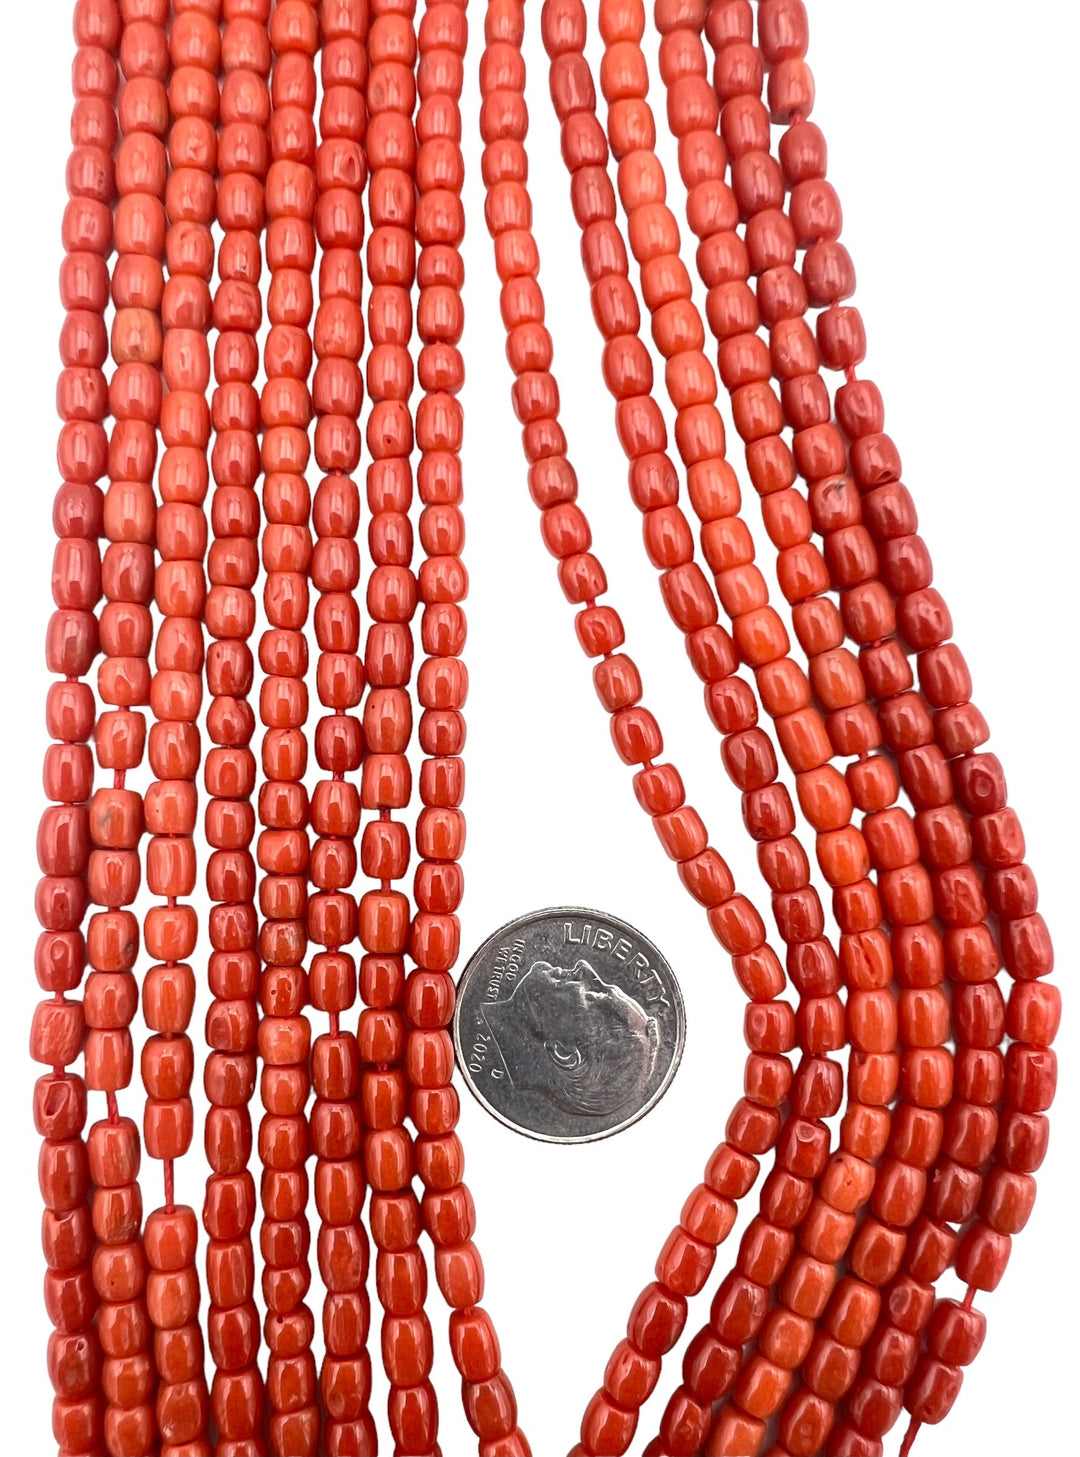 100% Natural High Quality Red Italian Sea Coral 4x5mm Barrel Shaped Beads (19 inch Strand)